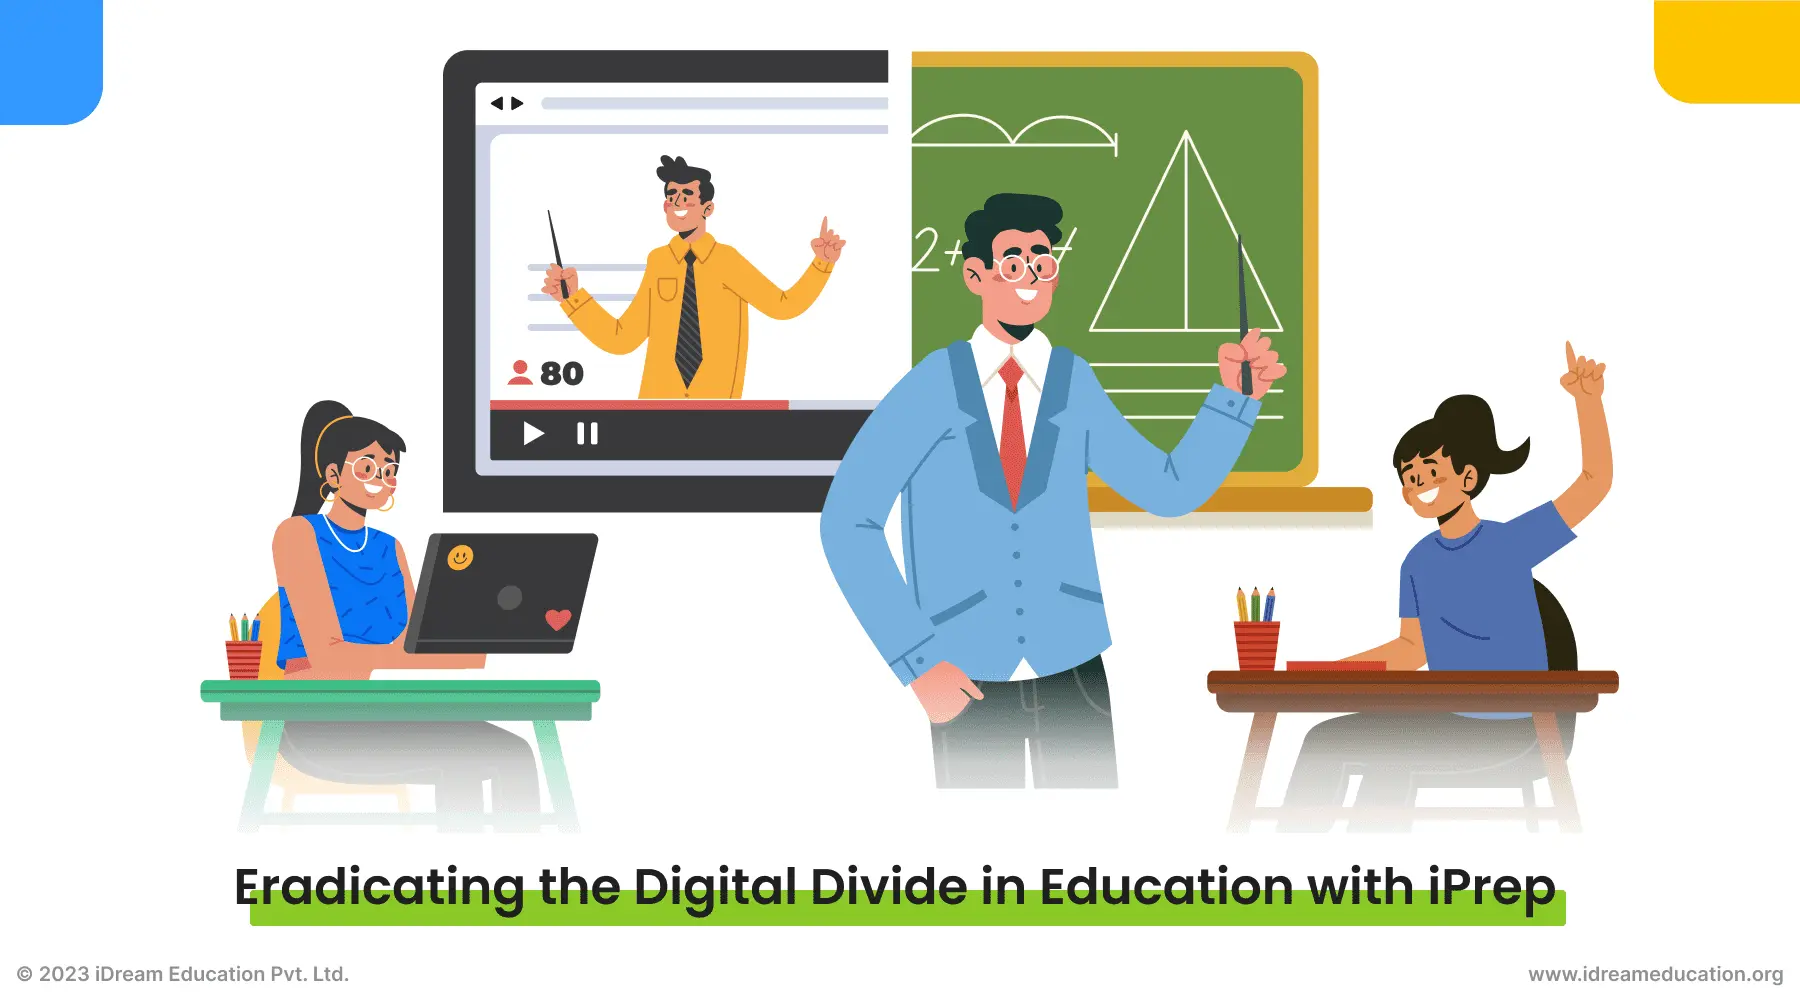 A visual representation of a teacher and students for eradicating the digital divide in education with the help of iPrep.